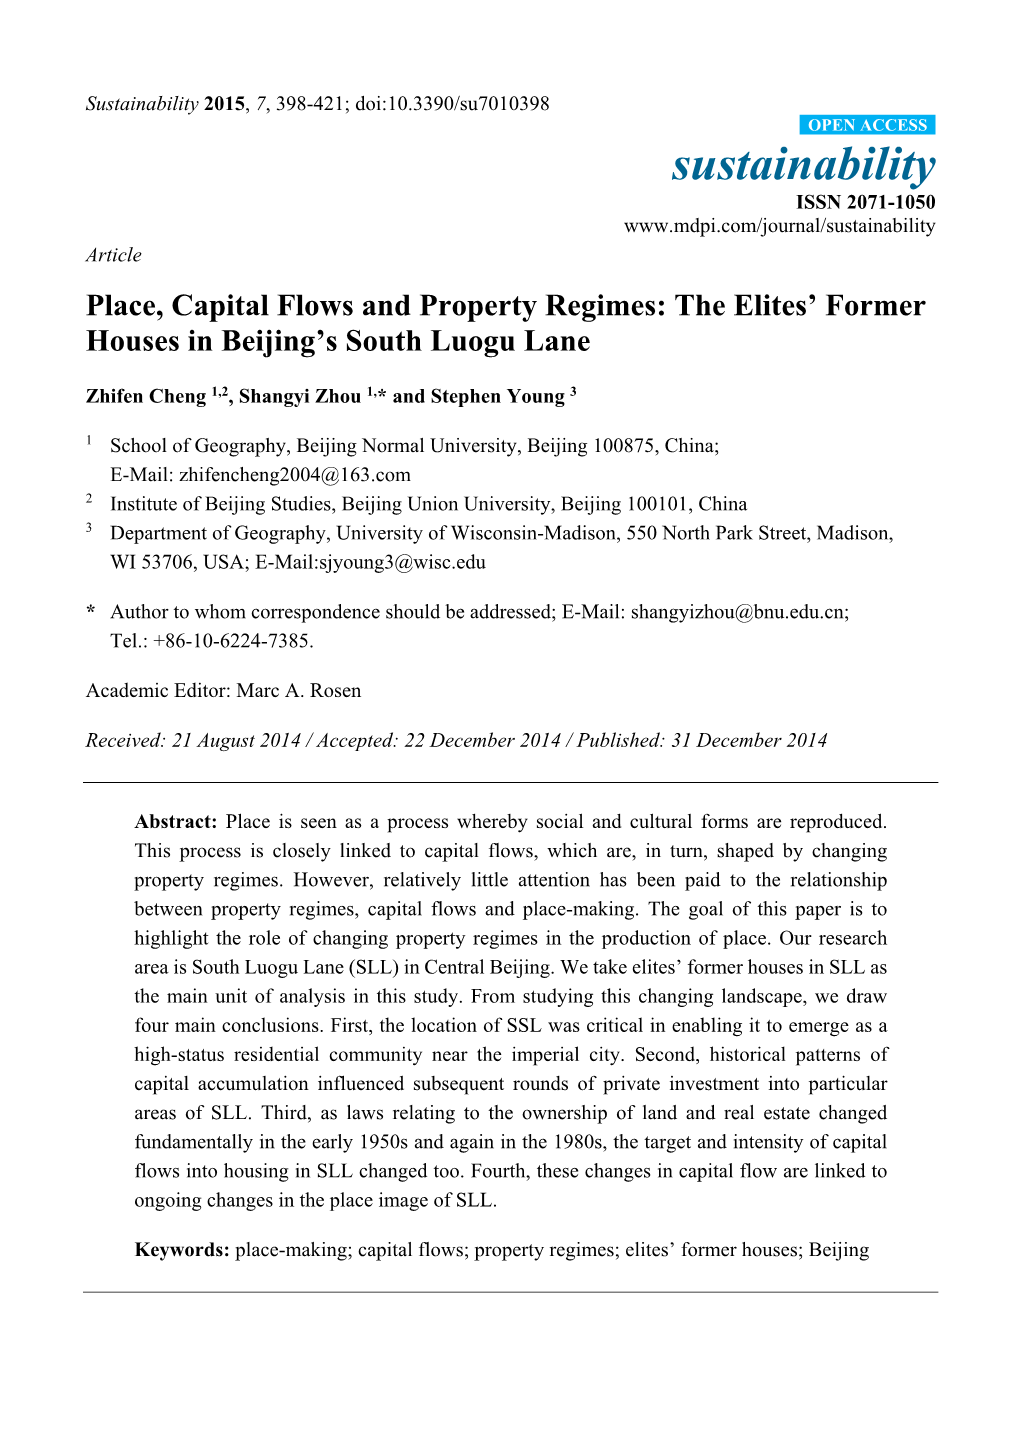 Place, Capital Flows and Property Regimes: the Elites' Former